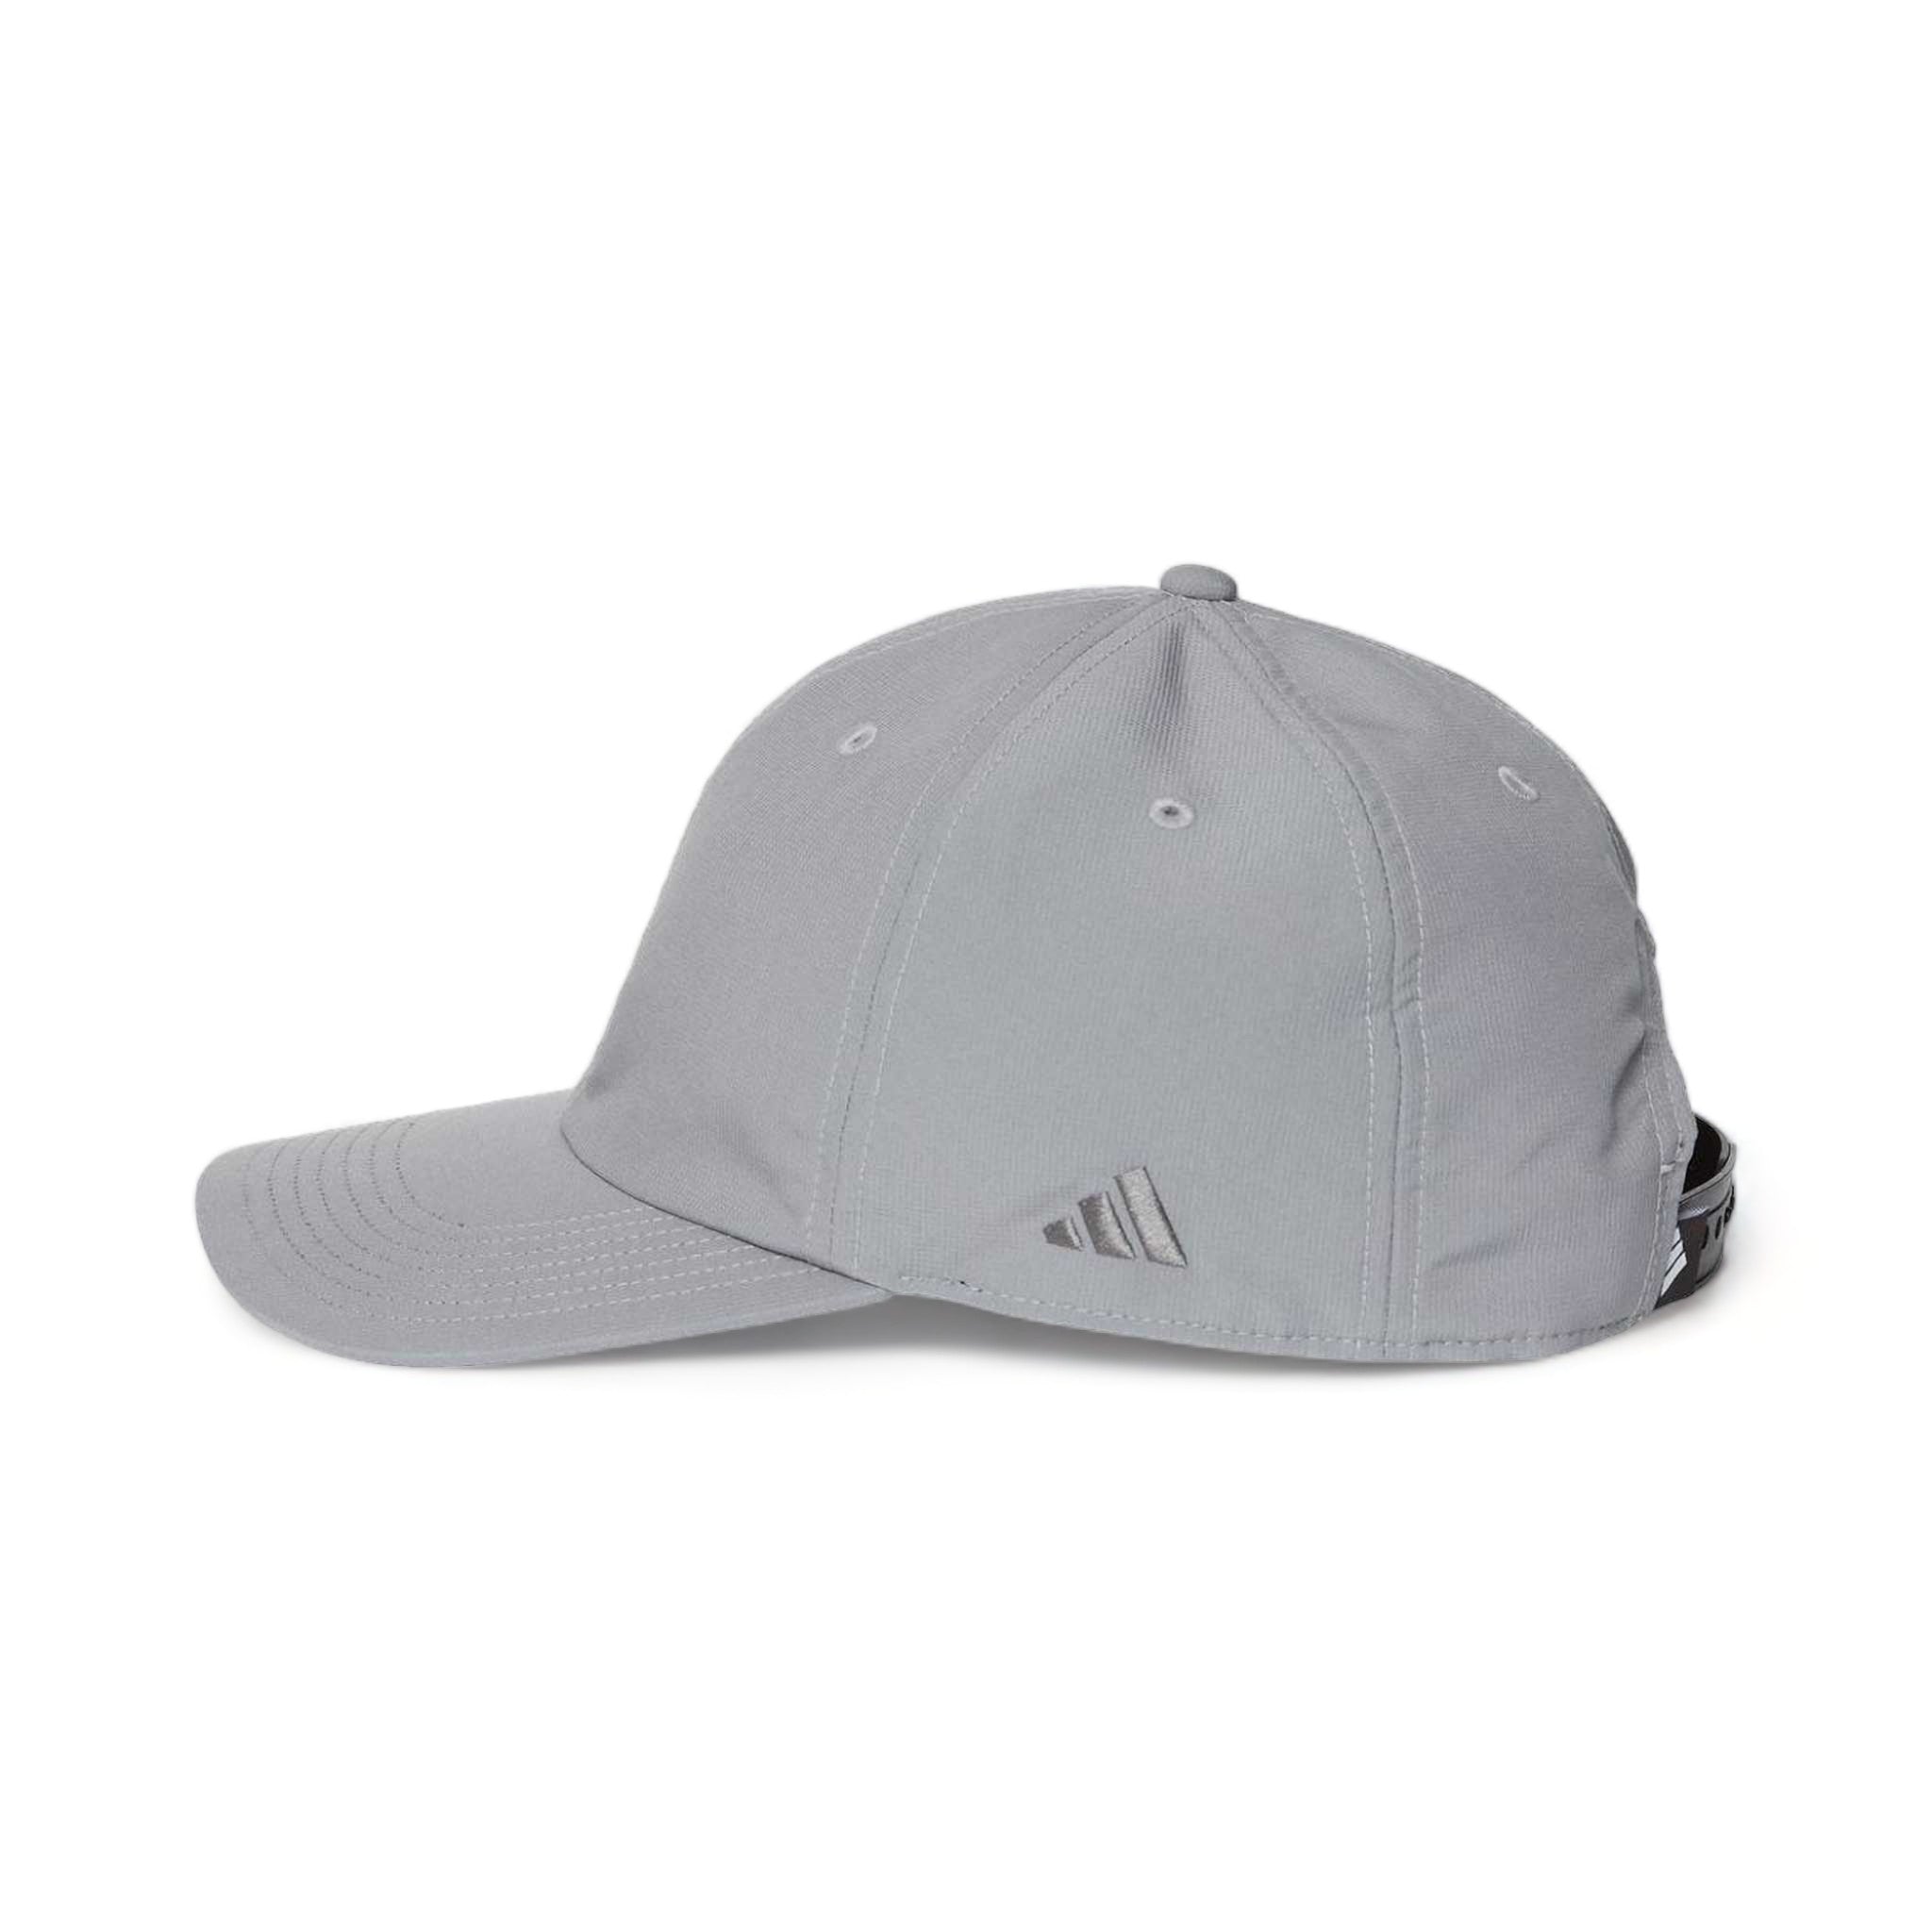 Side view of Adidas A605S custom hat in grey three